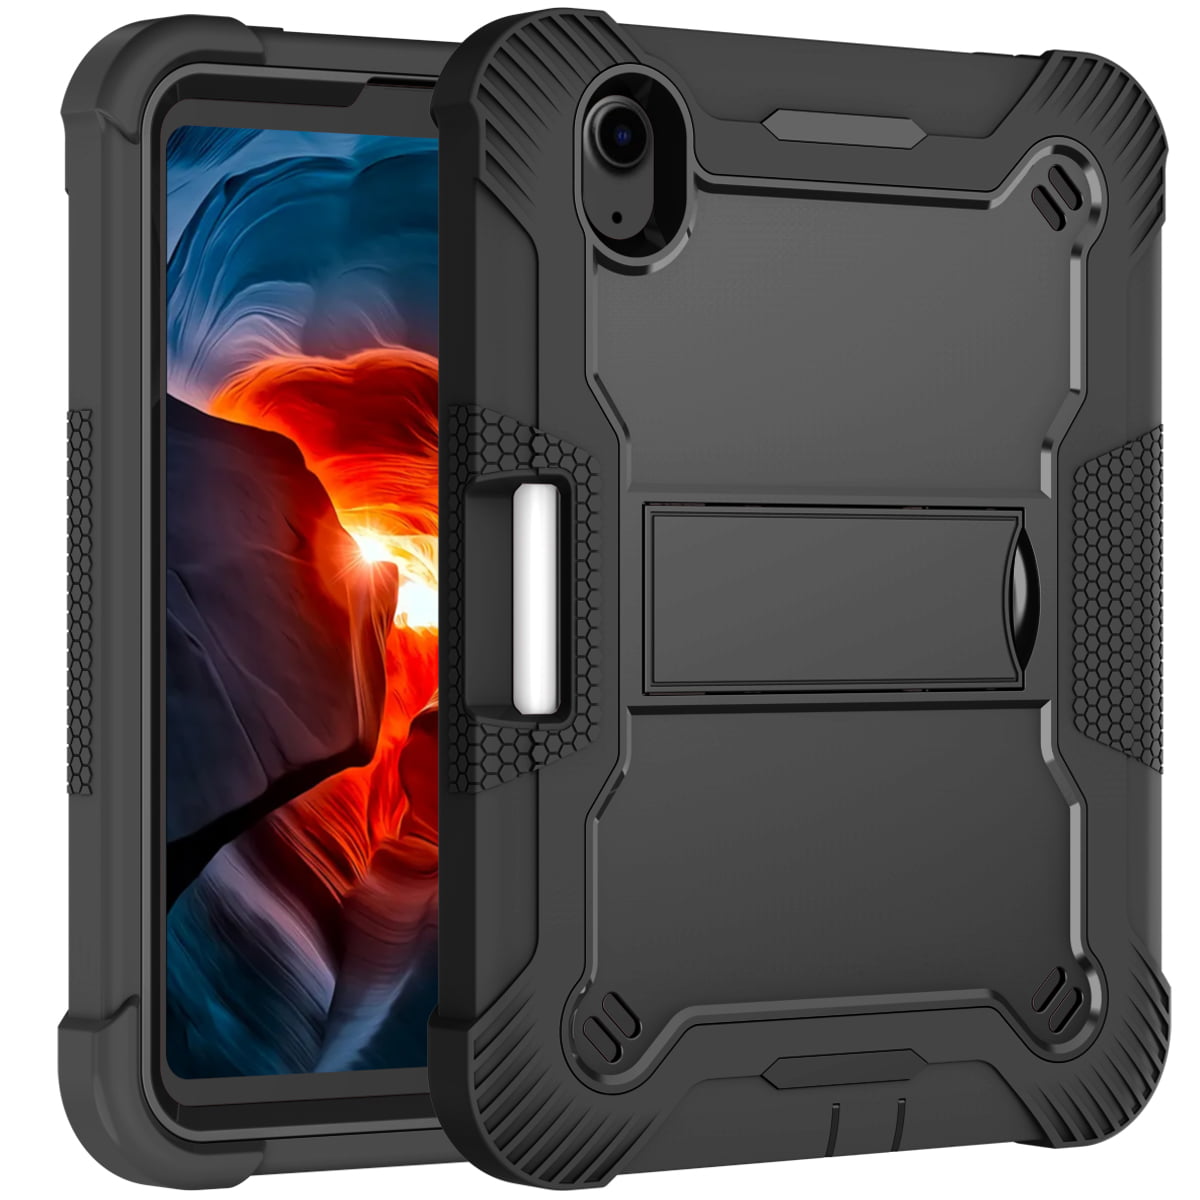 Allytech iPad mini 6 Case with Screen Protector, iPad mini 6 8.3-inch Case  for Kids, Military Grade Protection Shockproof Handle Grip Kickstand Case